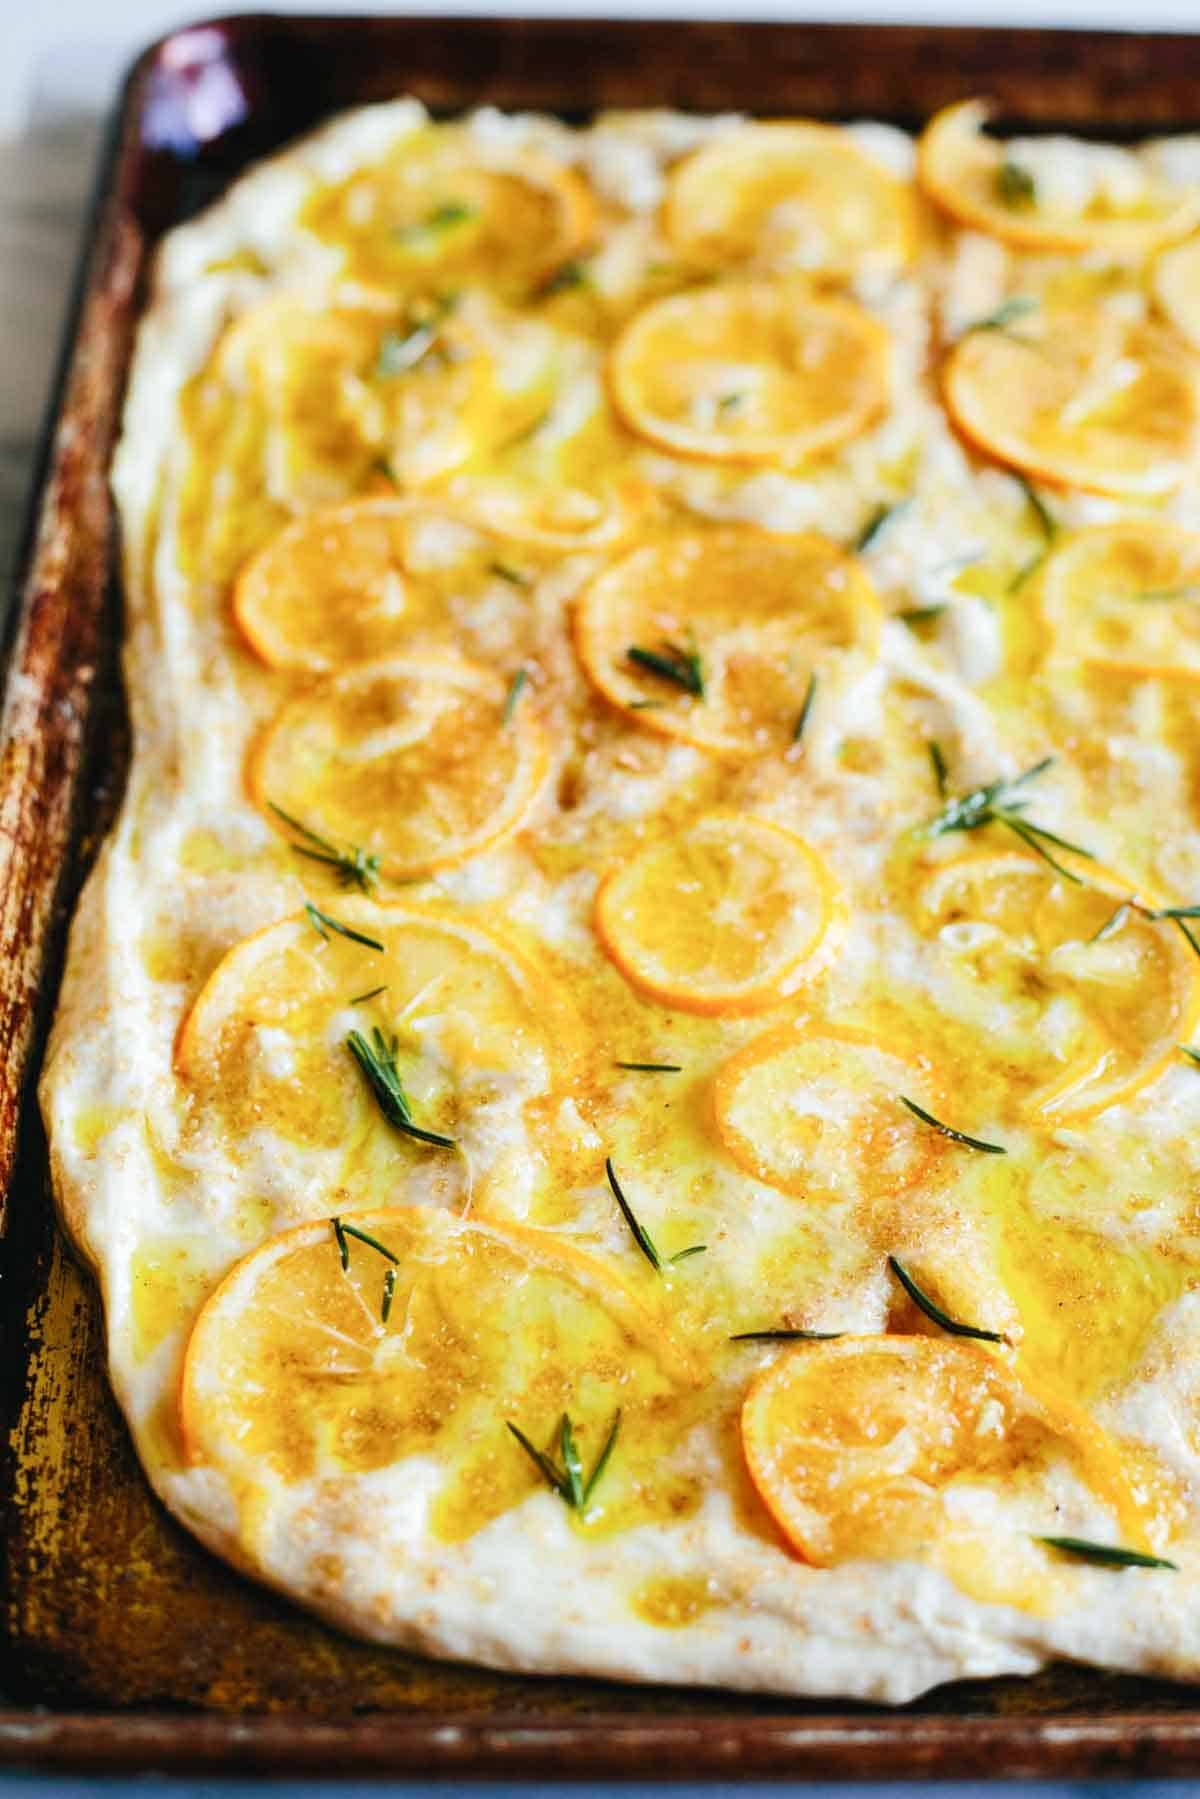 Focaccia dough spread out on a baking pan with sliced lemons, rosemary and raw sugar on top.